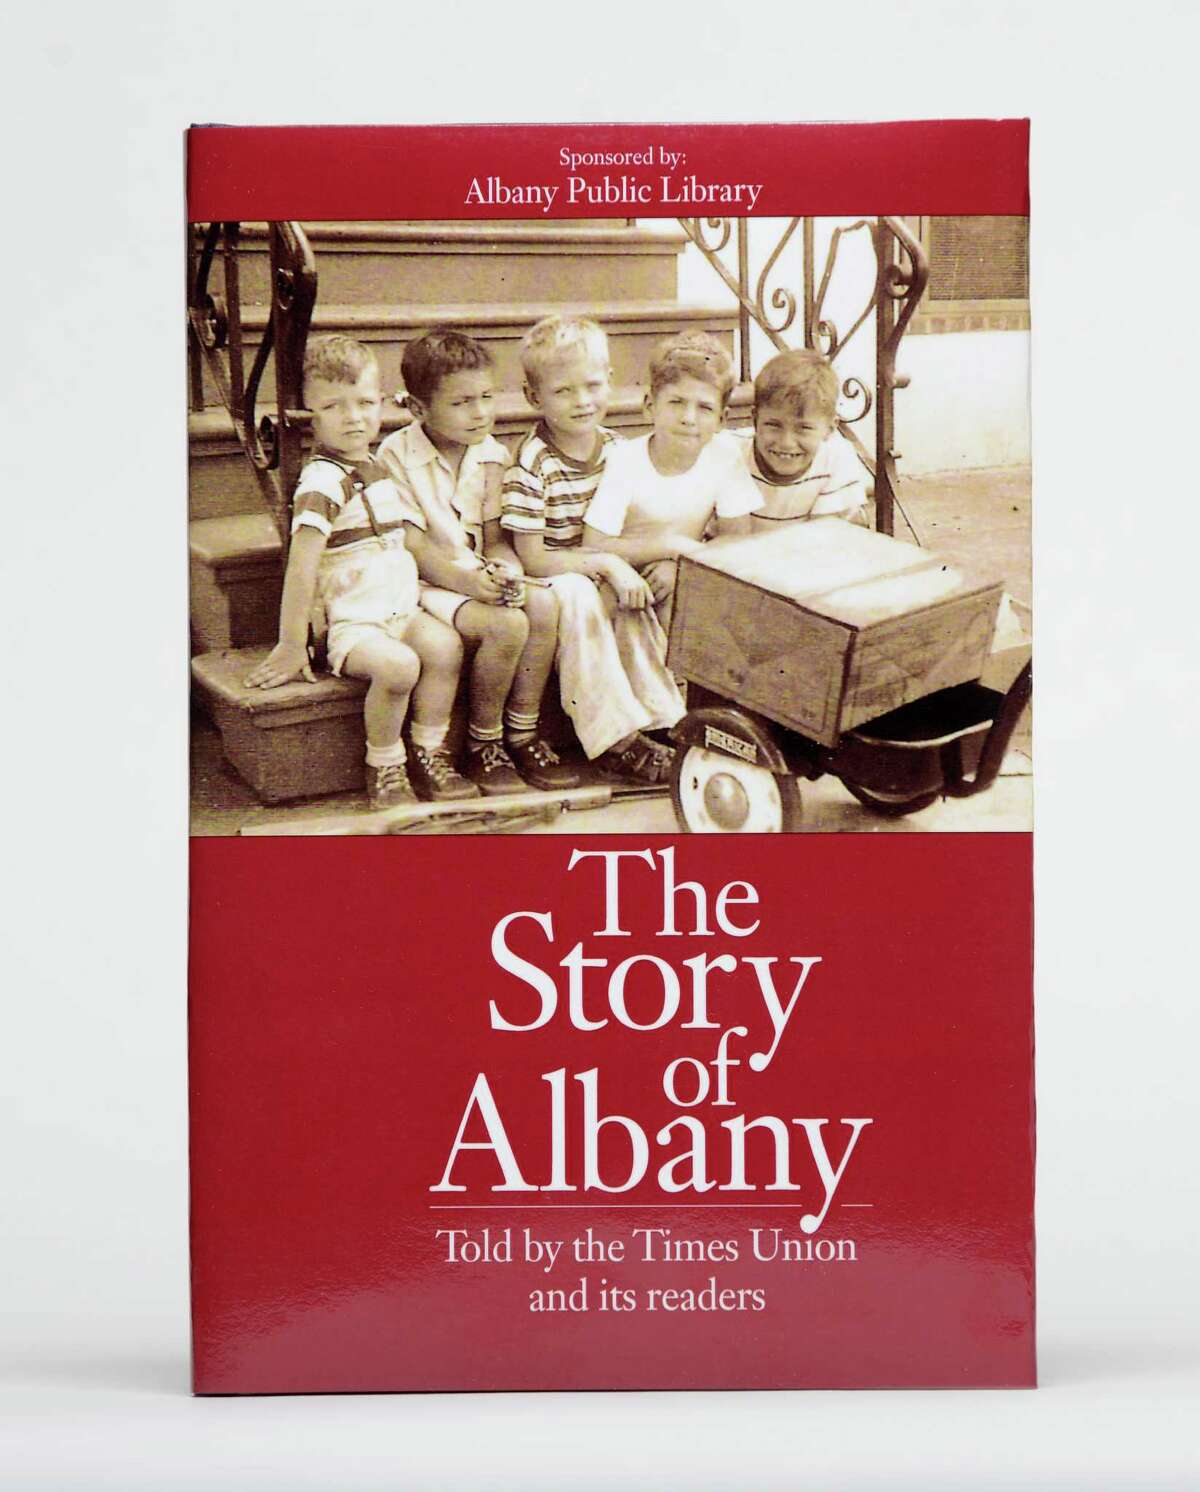 ?“The Story of Albany?“ book cover Tuesday, May 19, 2015, at the Times Union in Colonie, N.Y. (Will Waldron/Times Union)